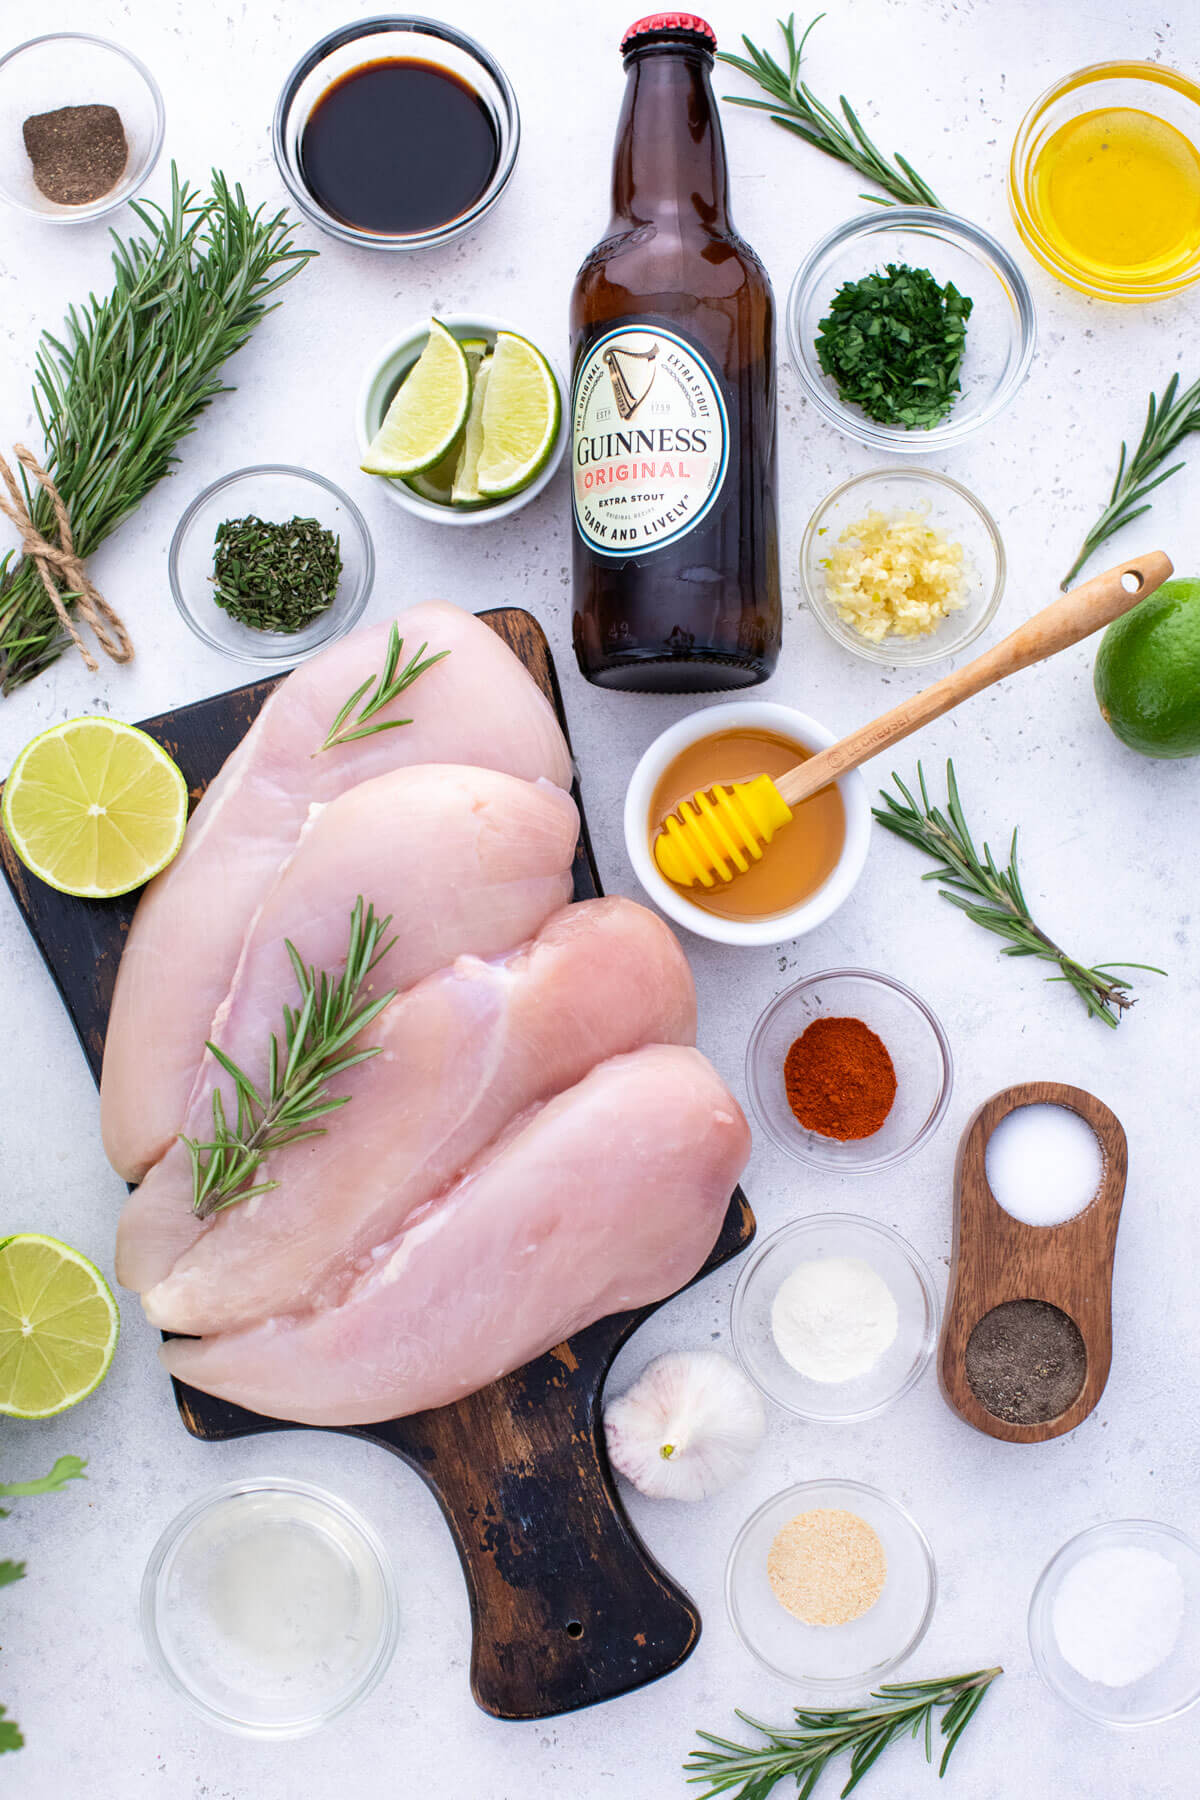 ingredients for grilled guinness chicken in a flat lay format with chicken breasts on wooden serving board, bottle of guinness beer and other ingredients in small bowls.